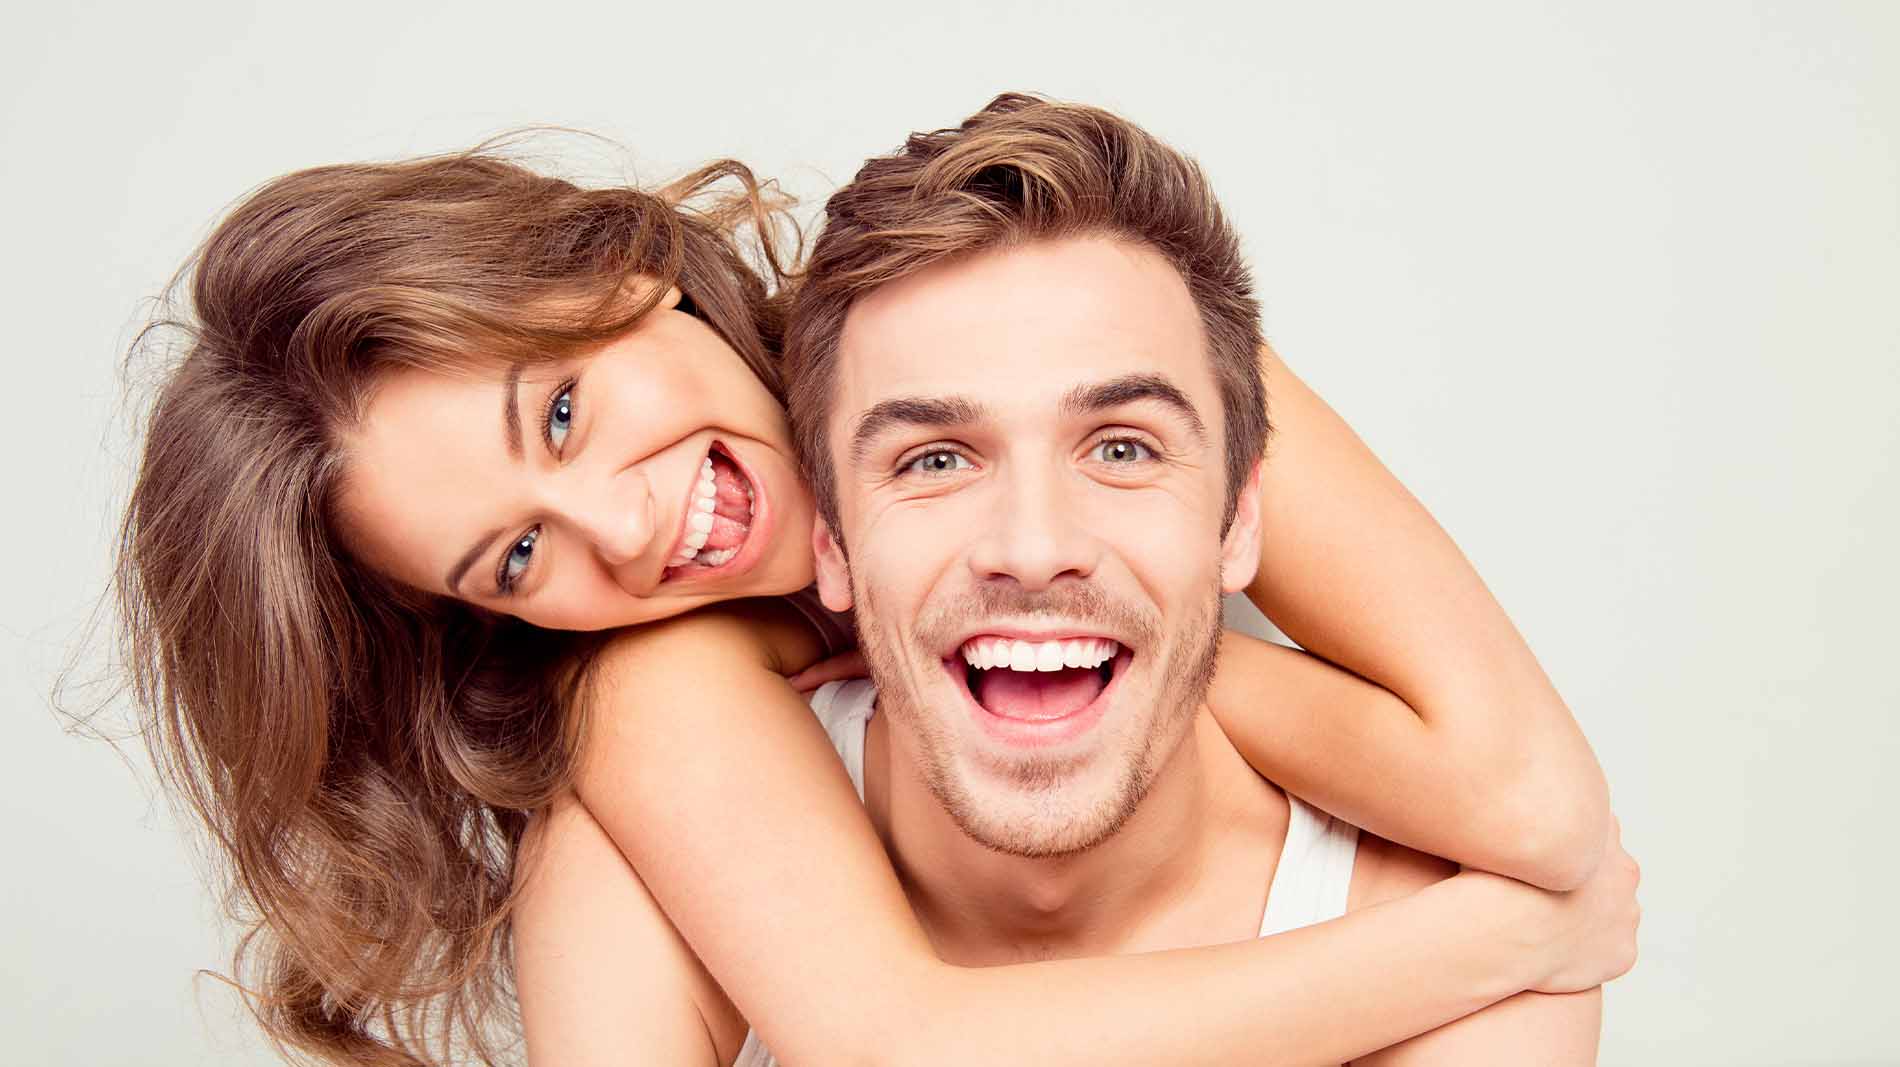 Brighter Smiles, Brighter Lives: The Benefits of Teeth Whitening